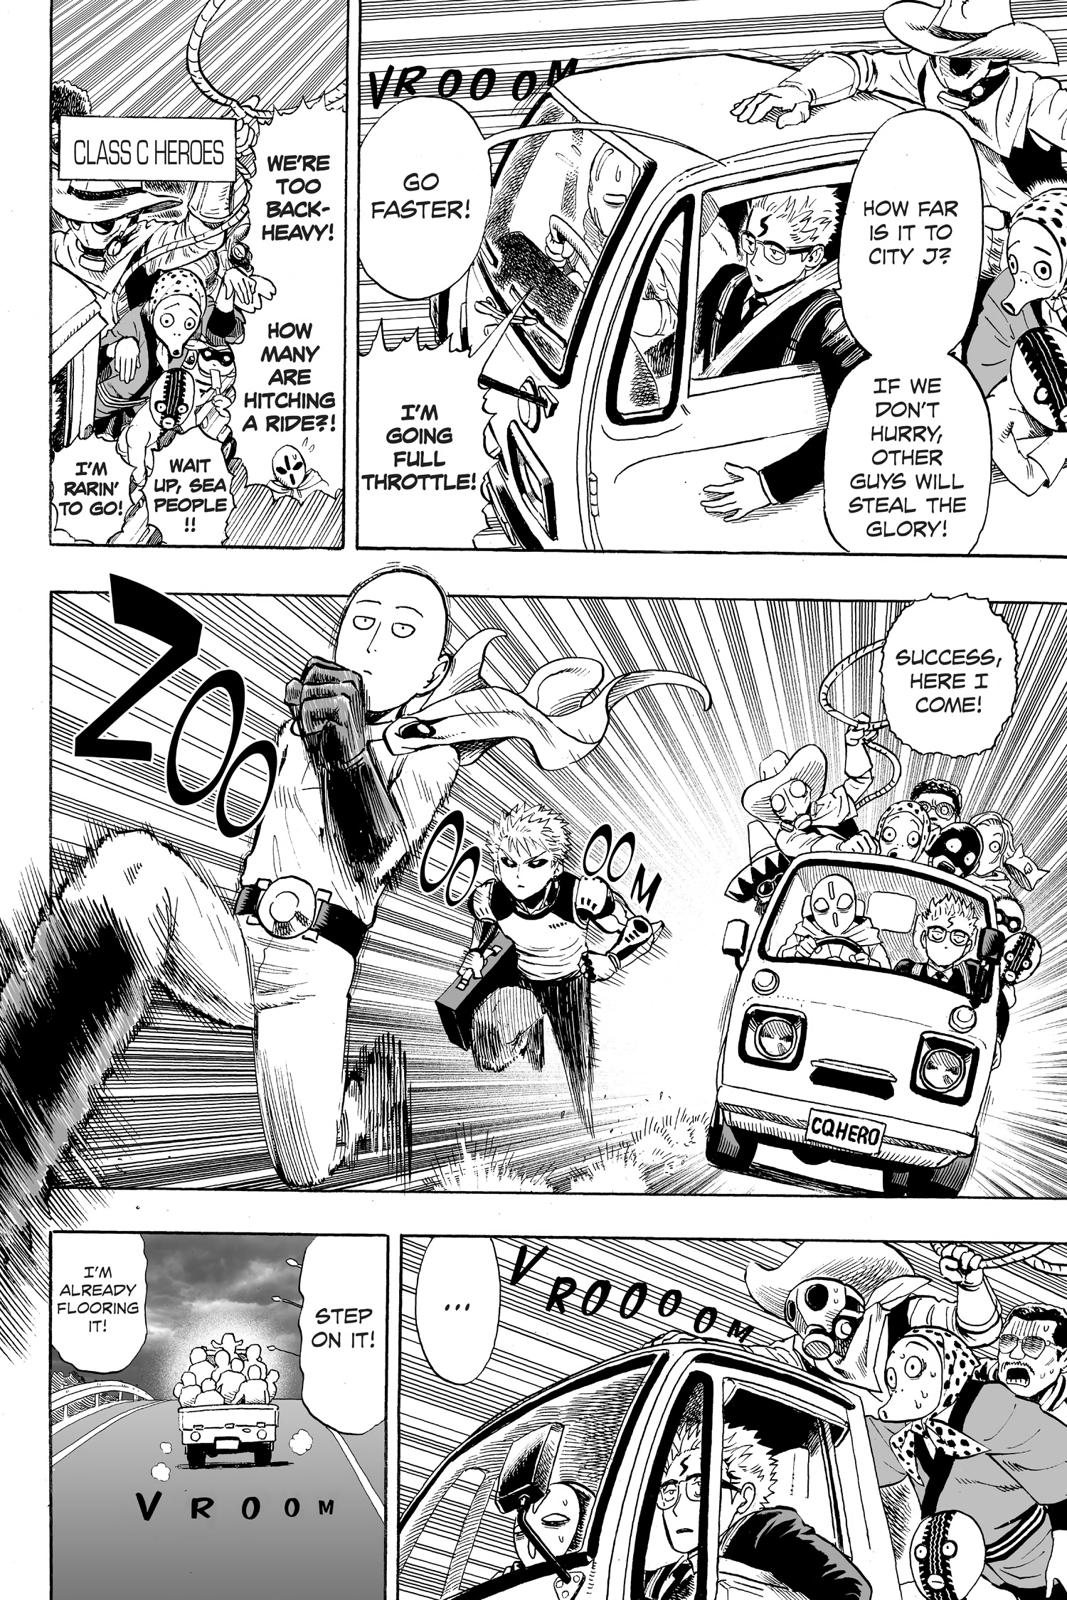 One-Punch Man, Punch 23 image 23